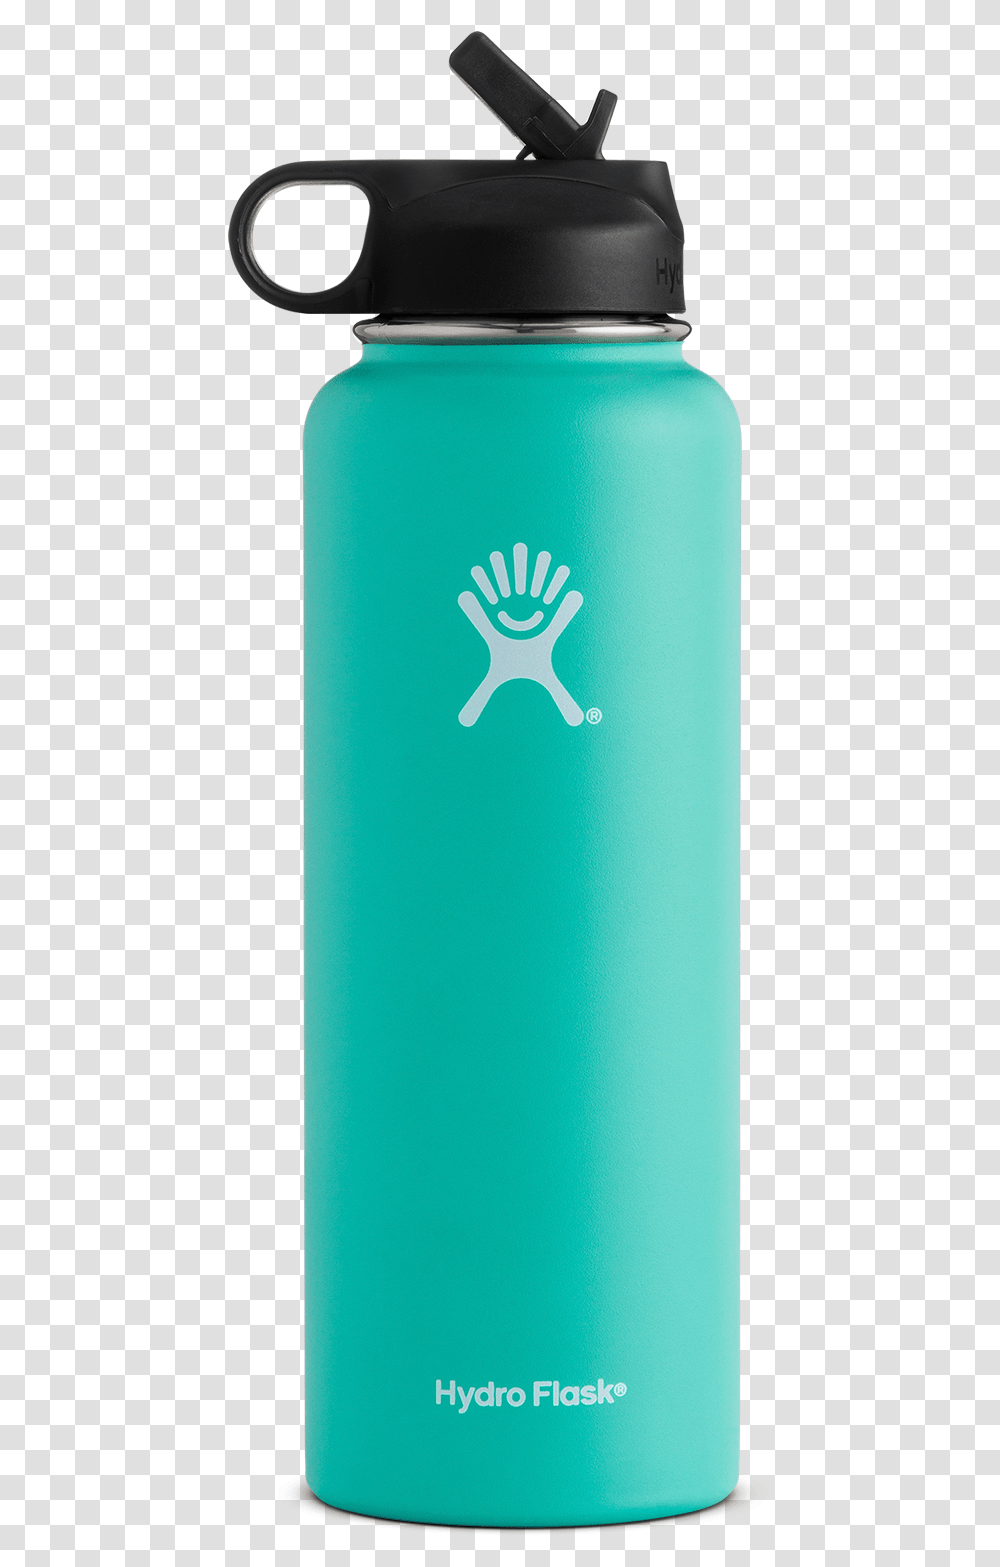 Red Hydro Flask With Straw, Bottle, Water Bottle, Mobile Phone, Electronics Transparent Png